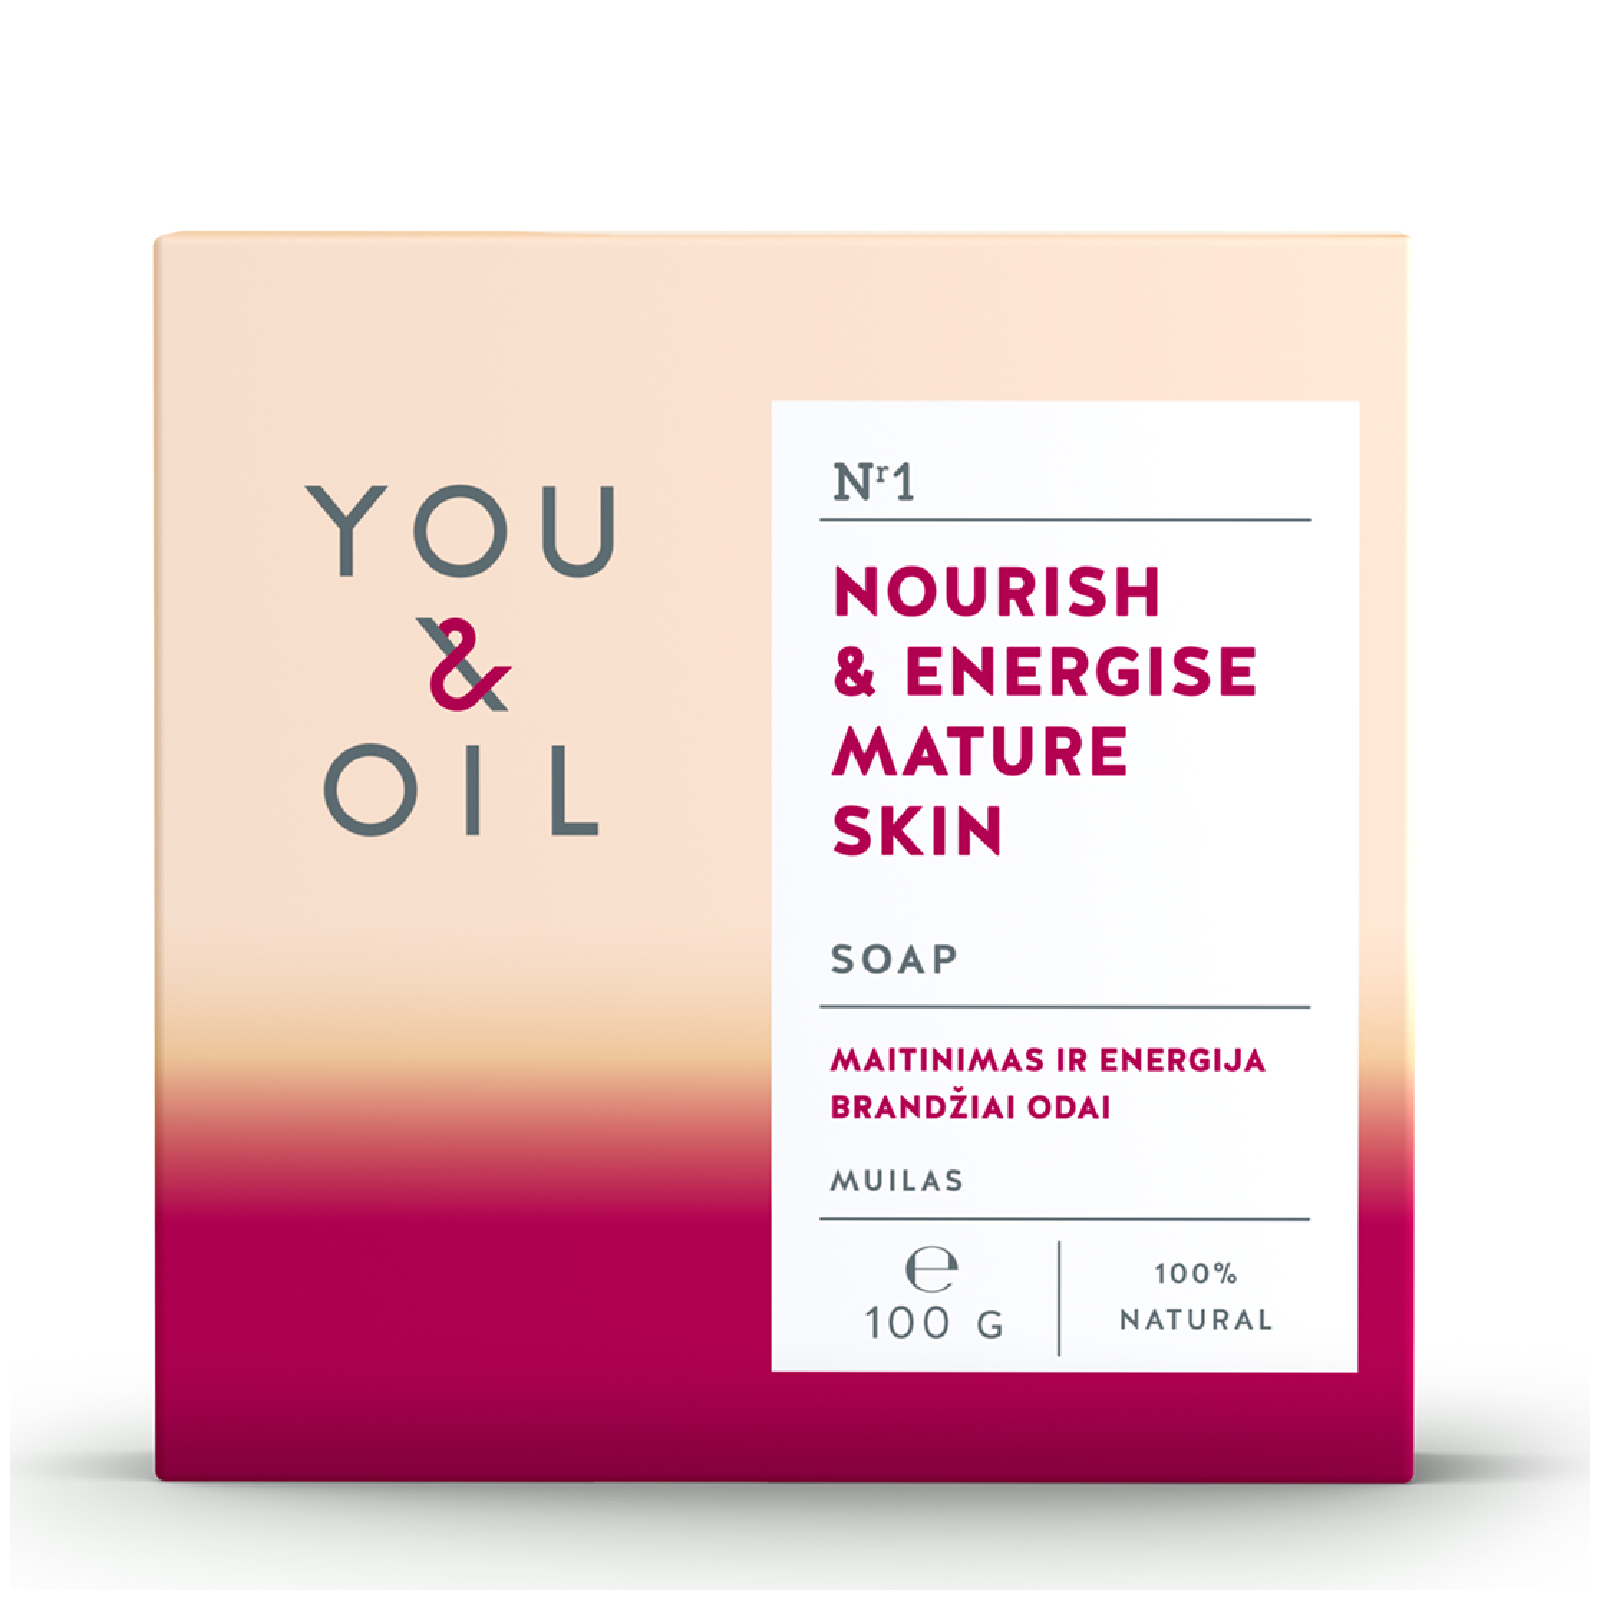 You & Oil Nourish & Energise Soap for Mature Skin 100g